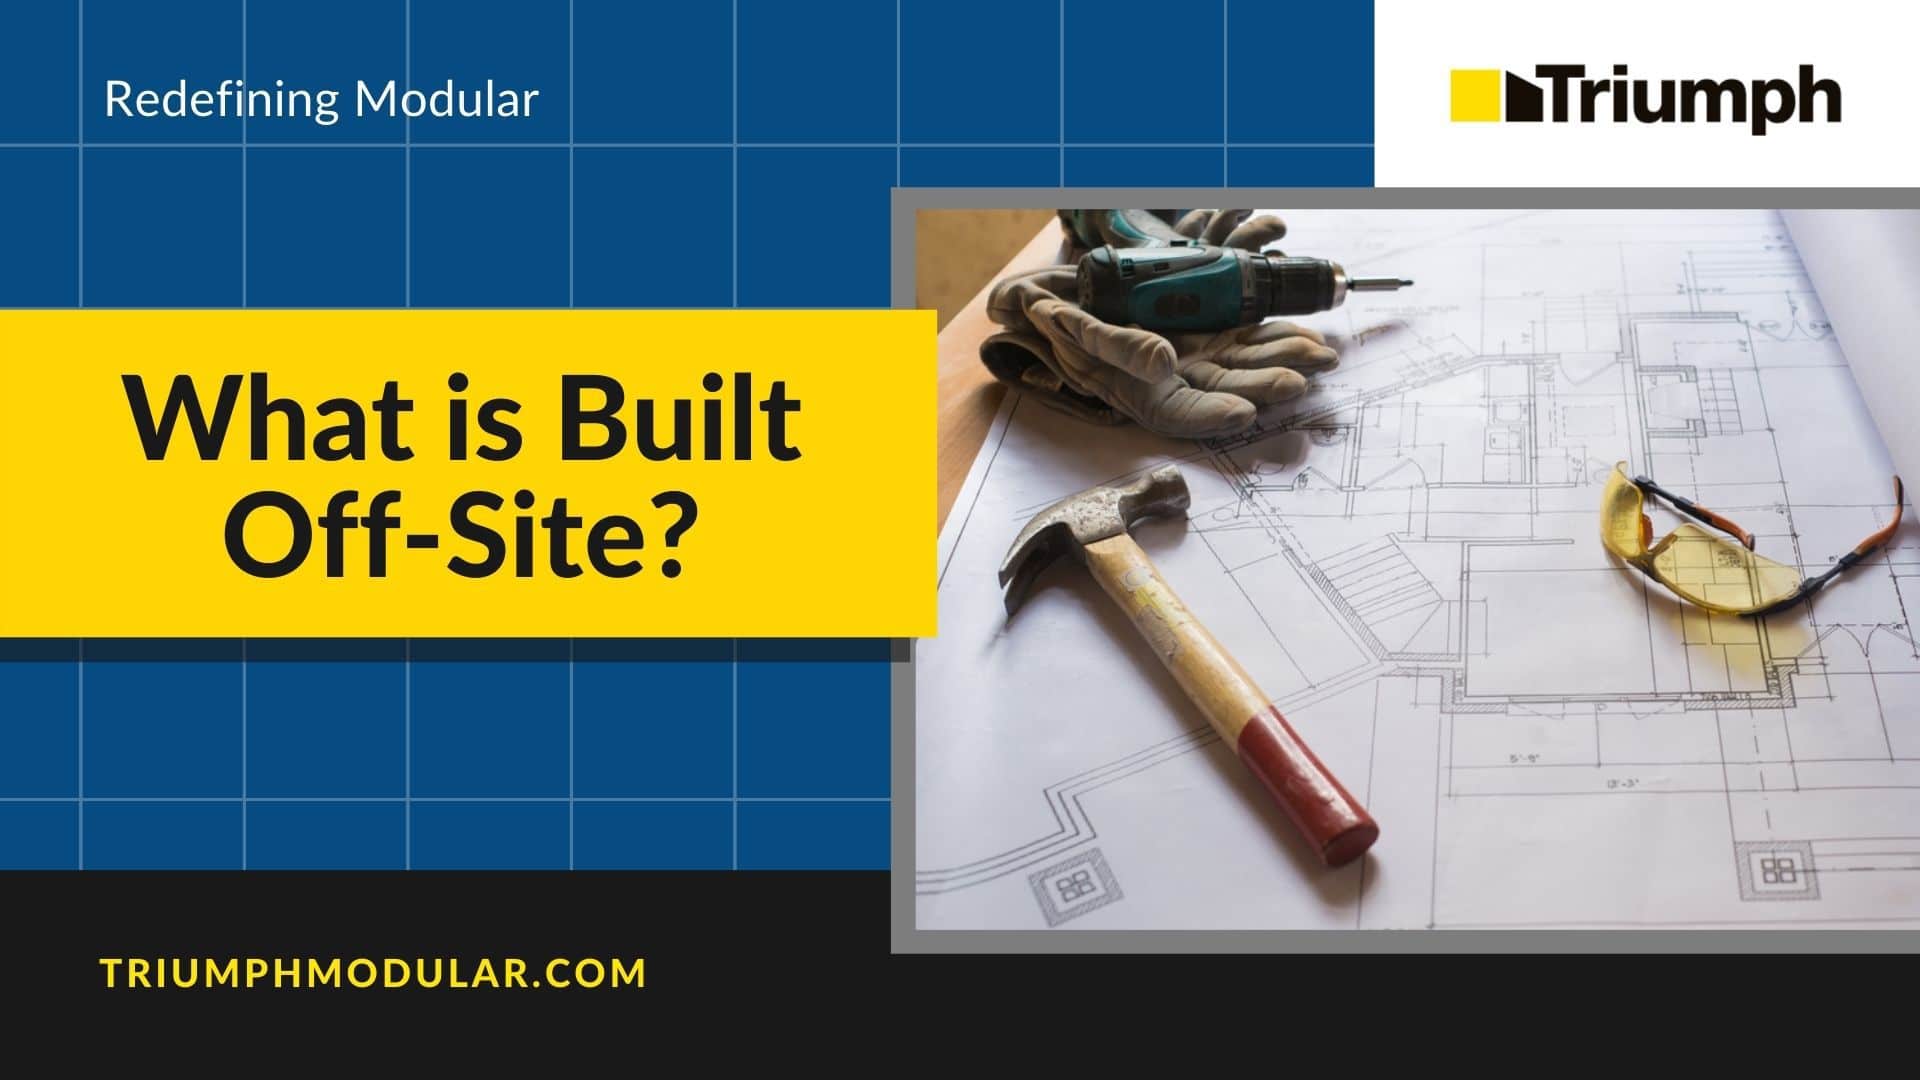 featured image for an article about what is built off-site